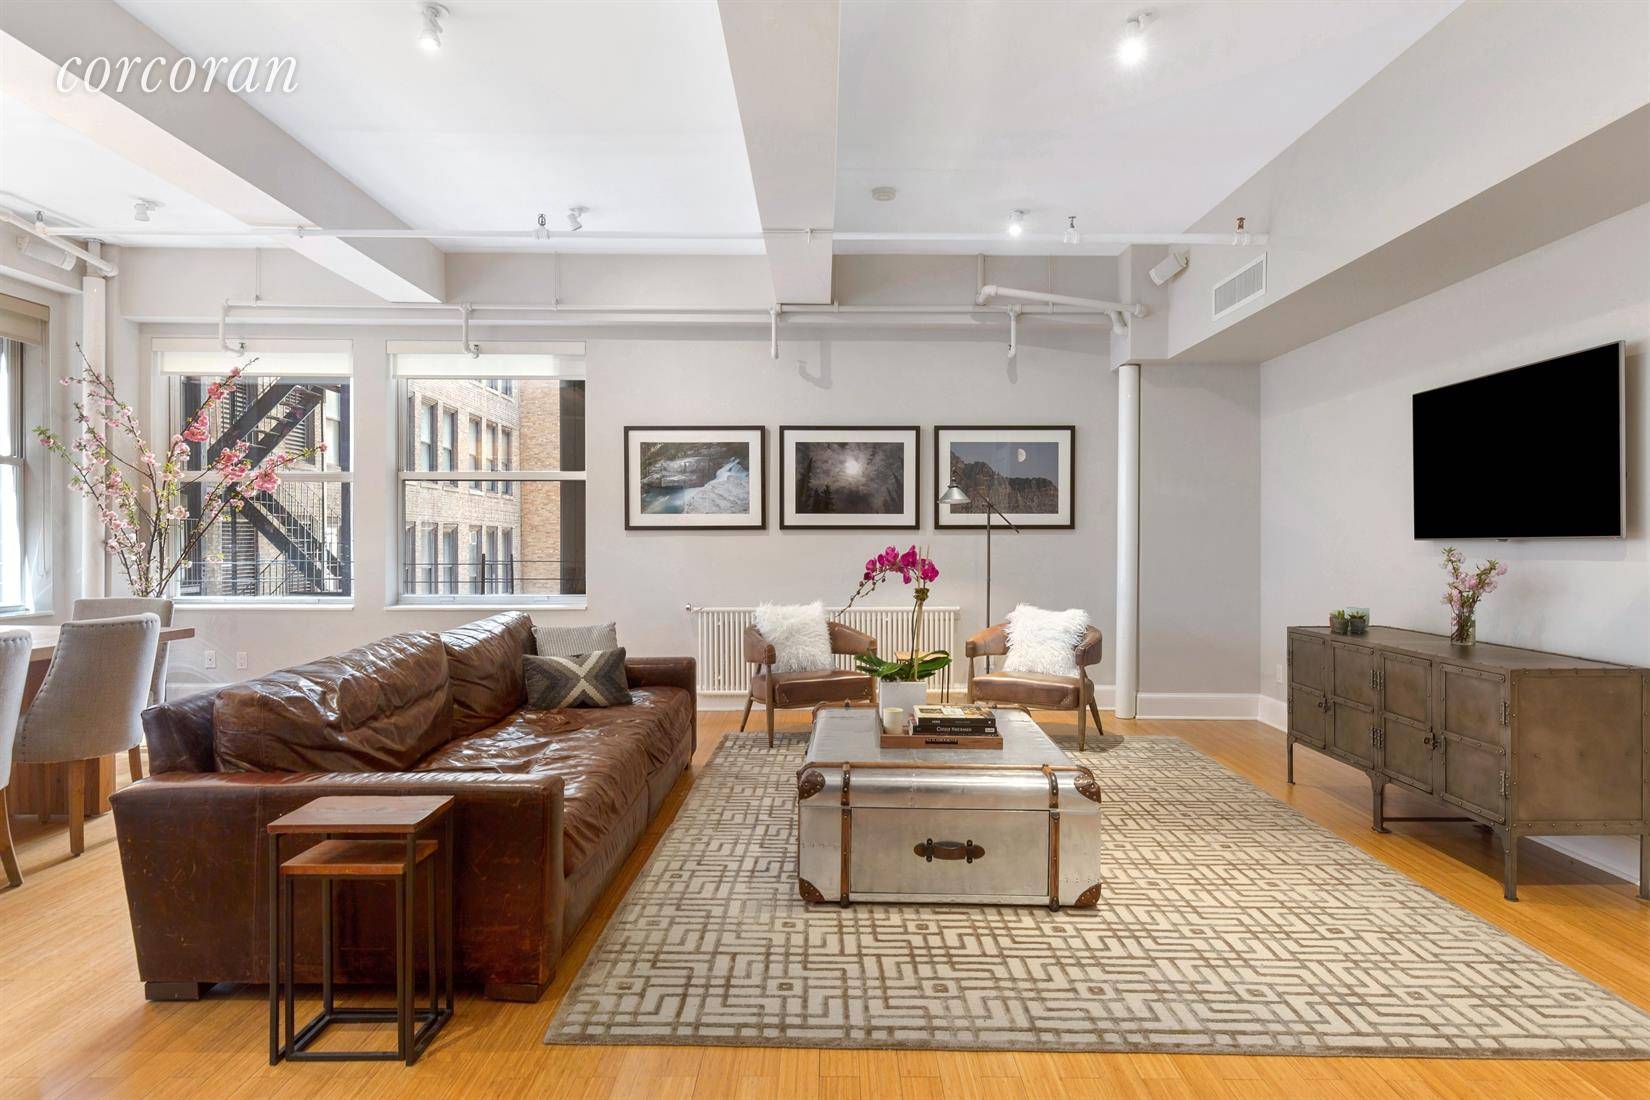 NEW PRICE for this TRUE 3 BR CONDO OPPORTUNITY at 150 West 26th Street.